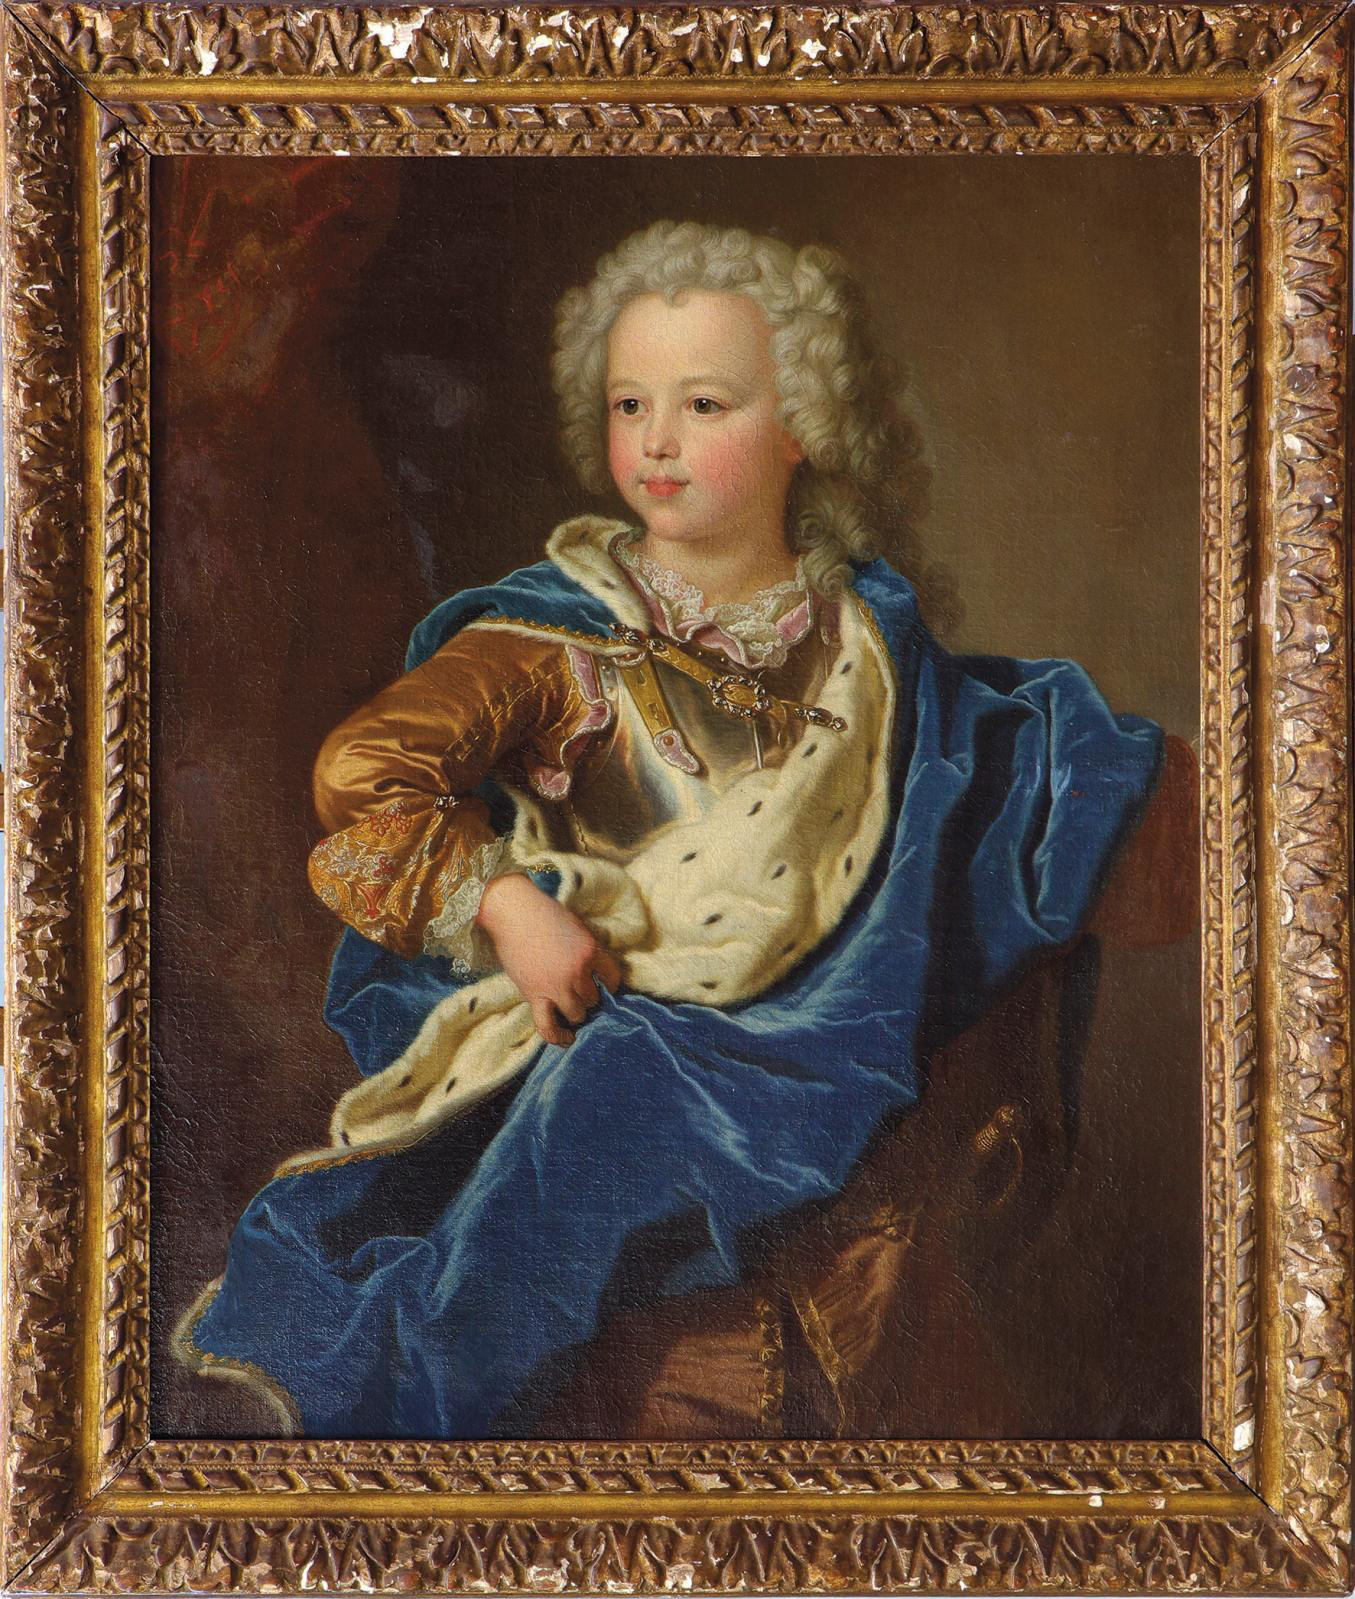 The Duc de Luynes Aged Five by the Studio of Hyacinthe Rigaud